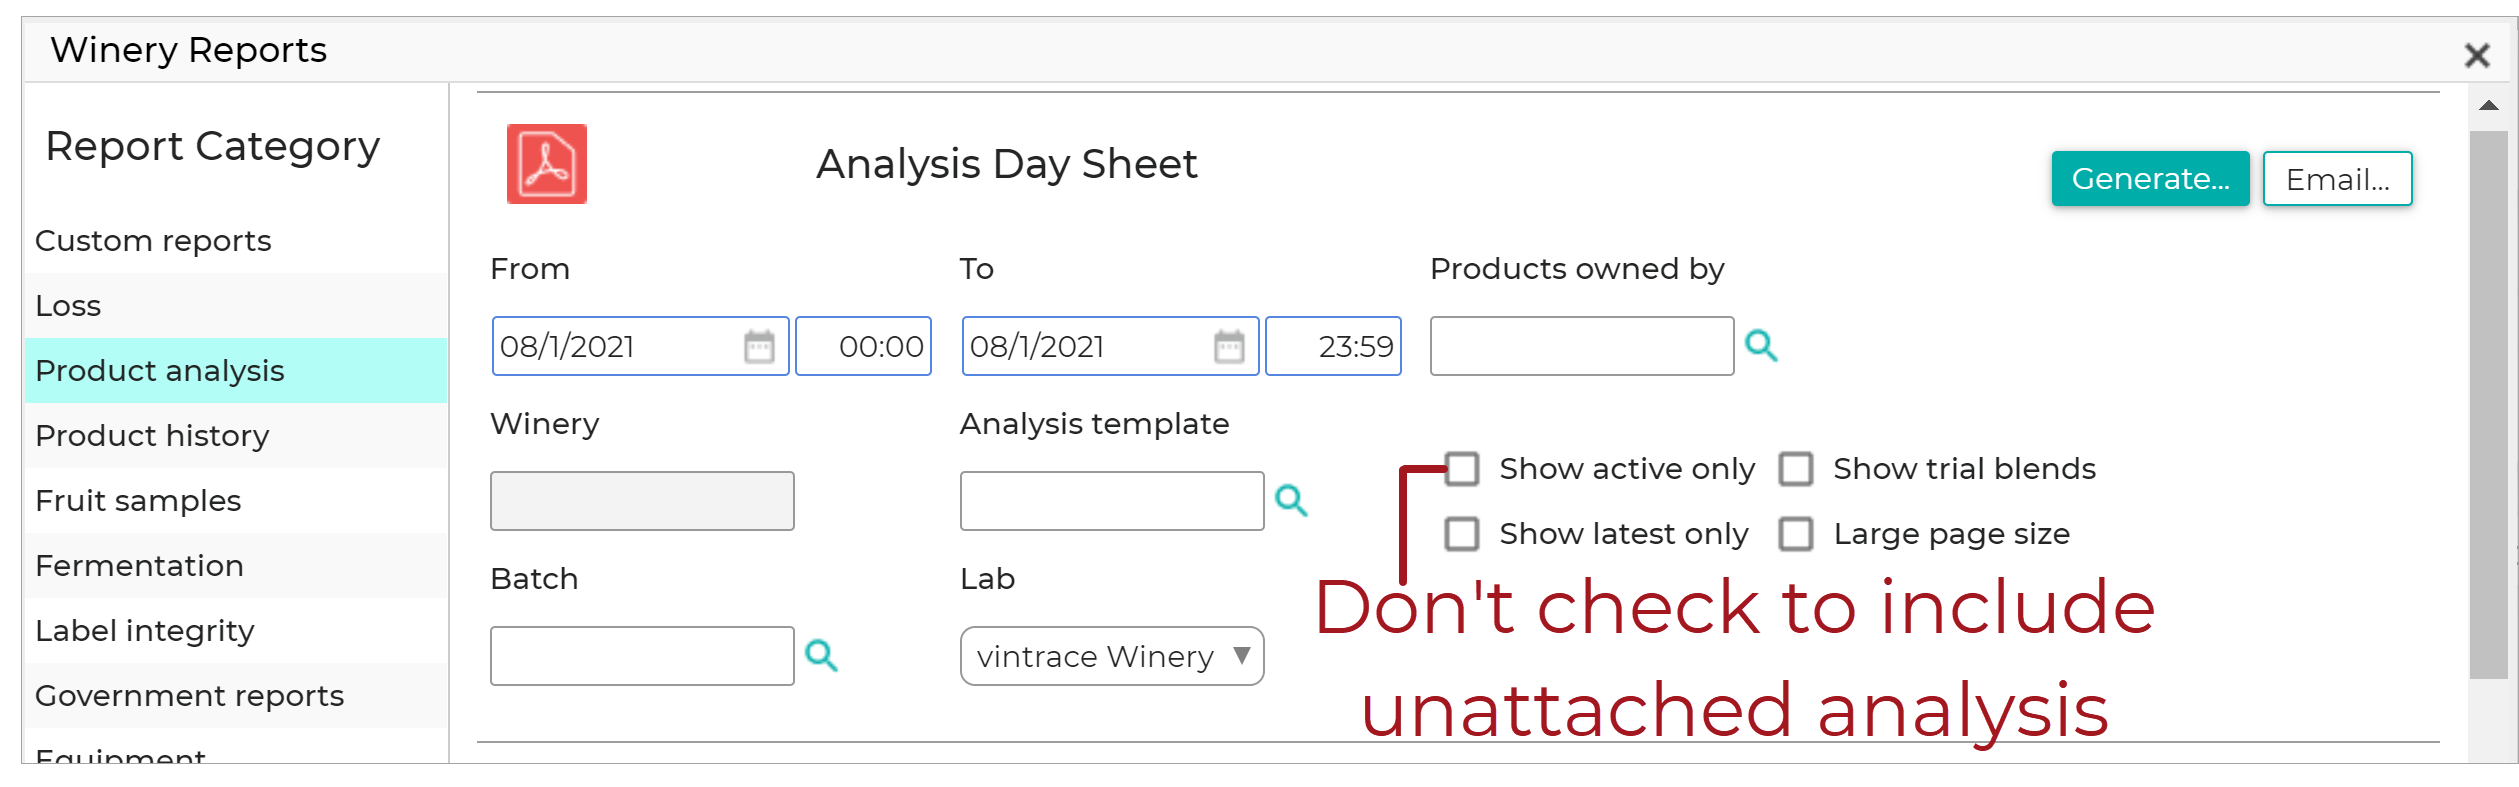 Winery_Reports_-_Analysis_Day_Sheet_20210810.png